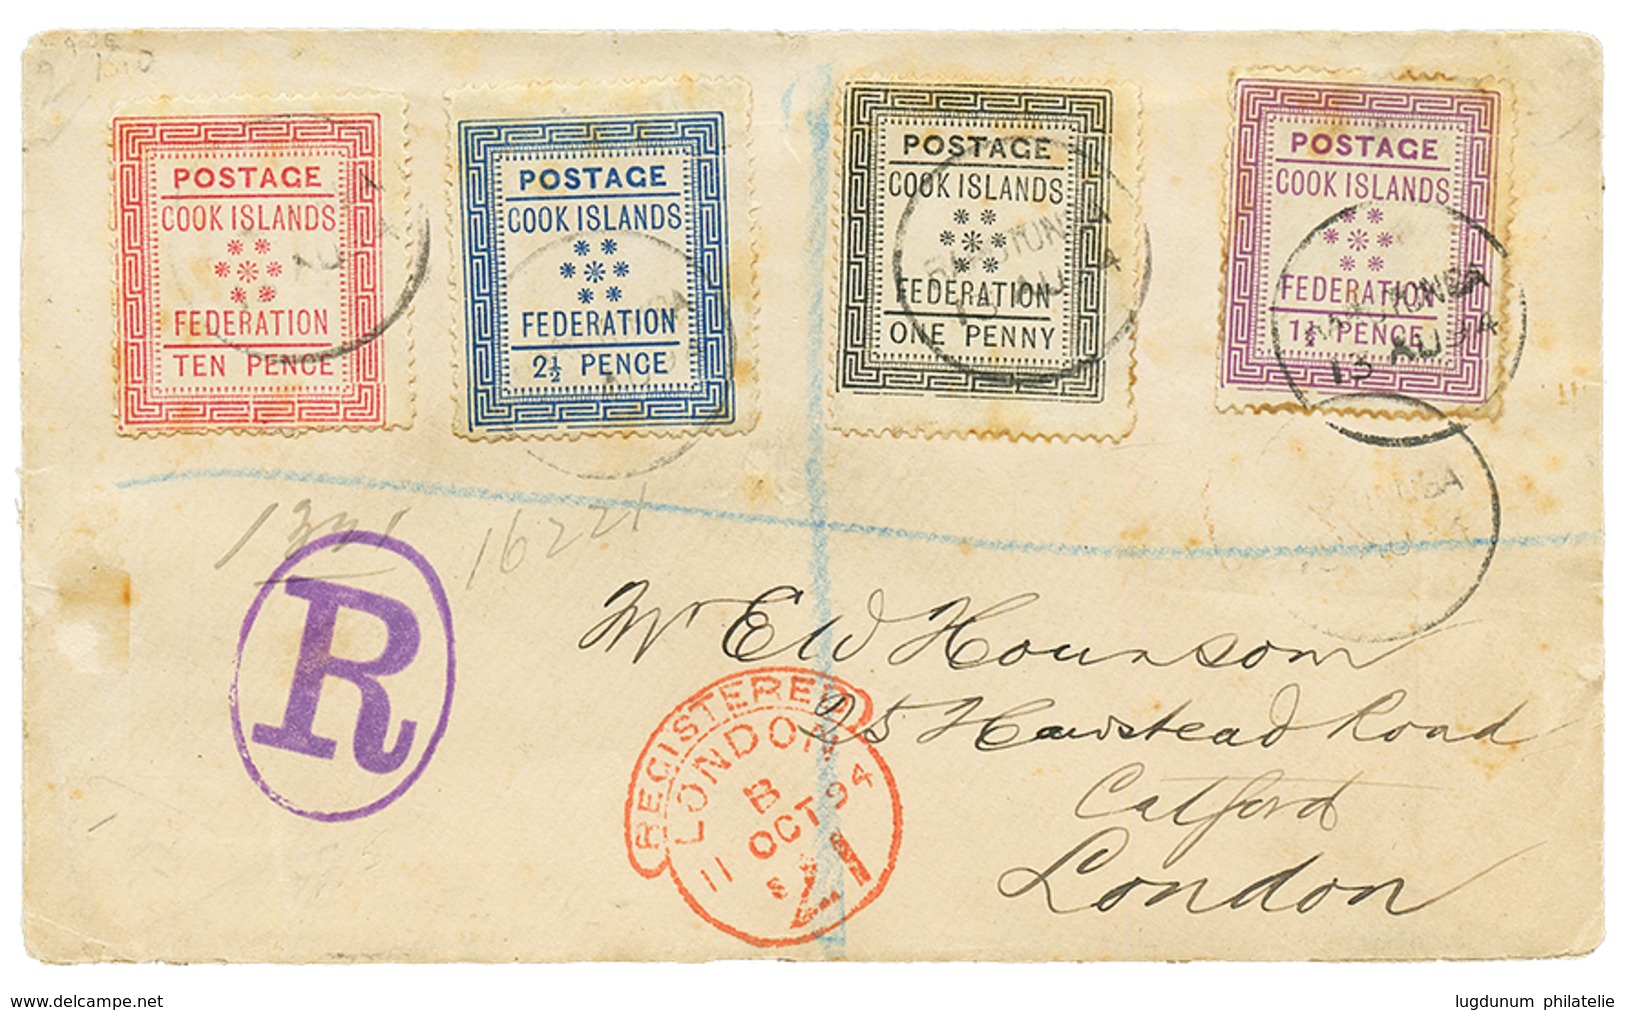 1894 COOK ISLANDS 1d+ 1 1/2d+ 2 1/2d + 10d Canc. RAROTONGA On REGISTERED Envelope To LONDON. Vf. - Cook